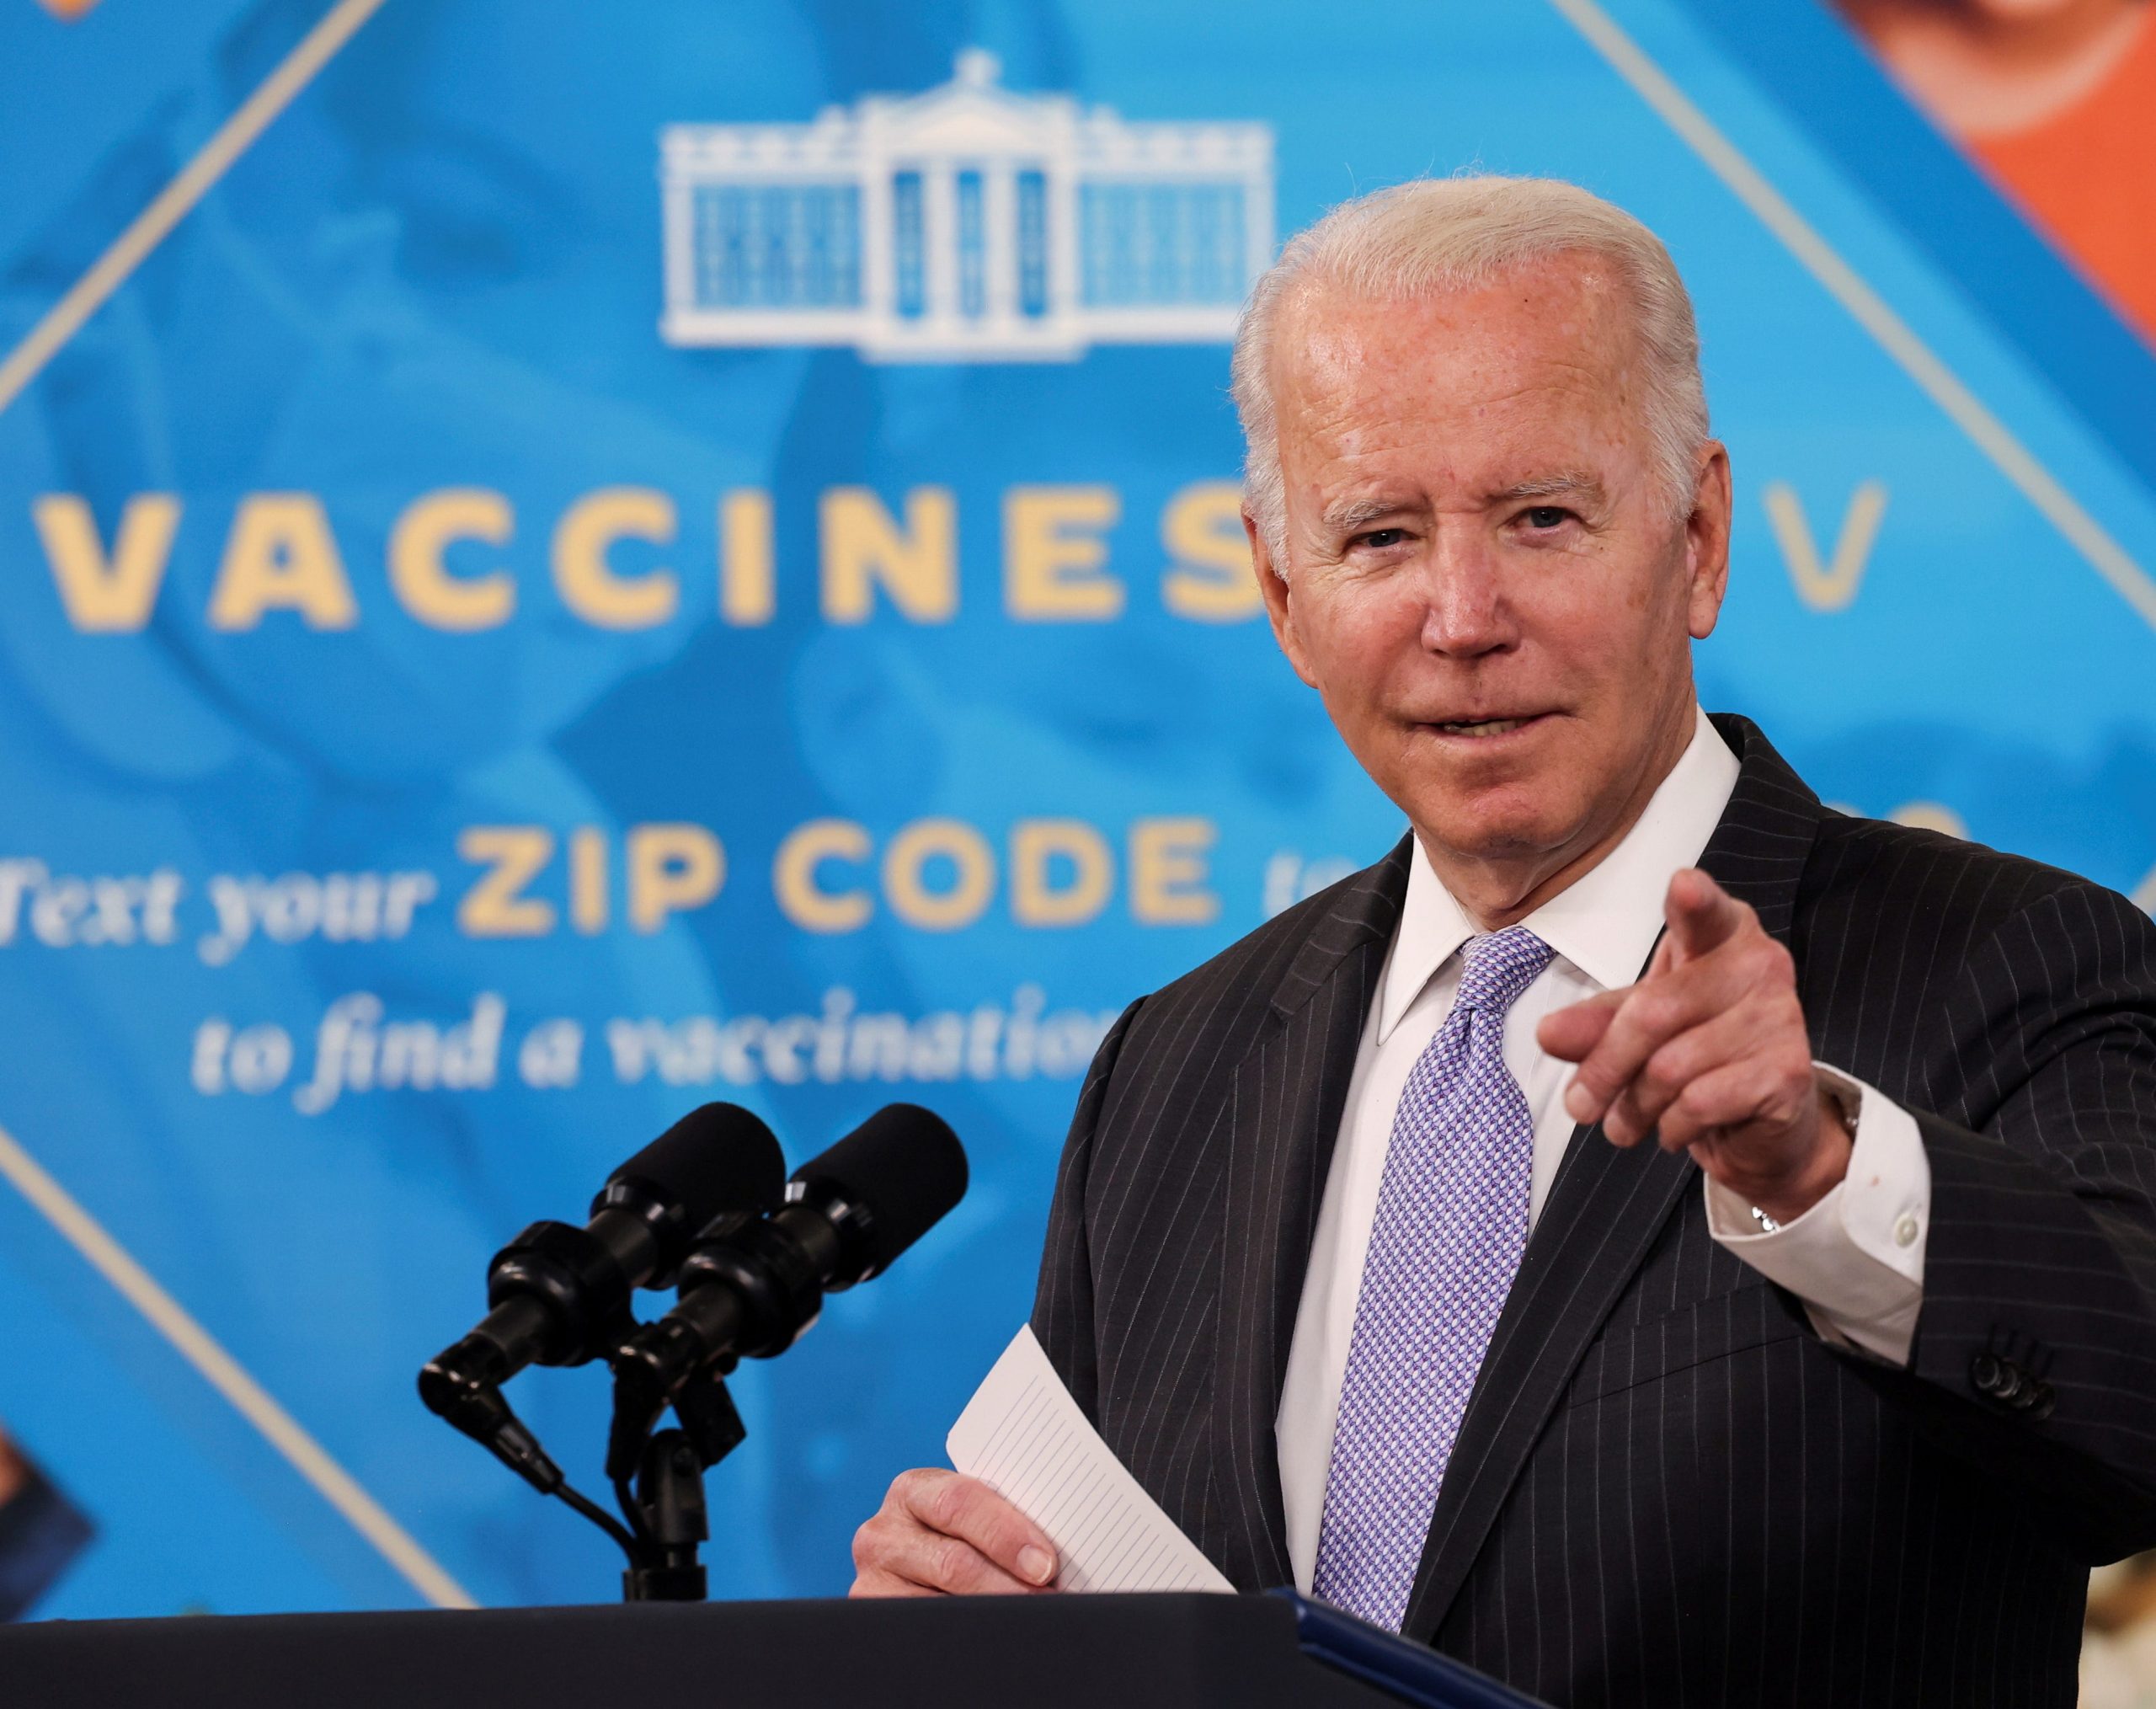 President Joe Biden stands behind microphones and points toward the camera in front of a vaccine sign